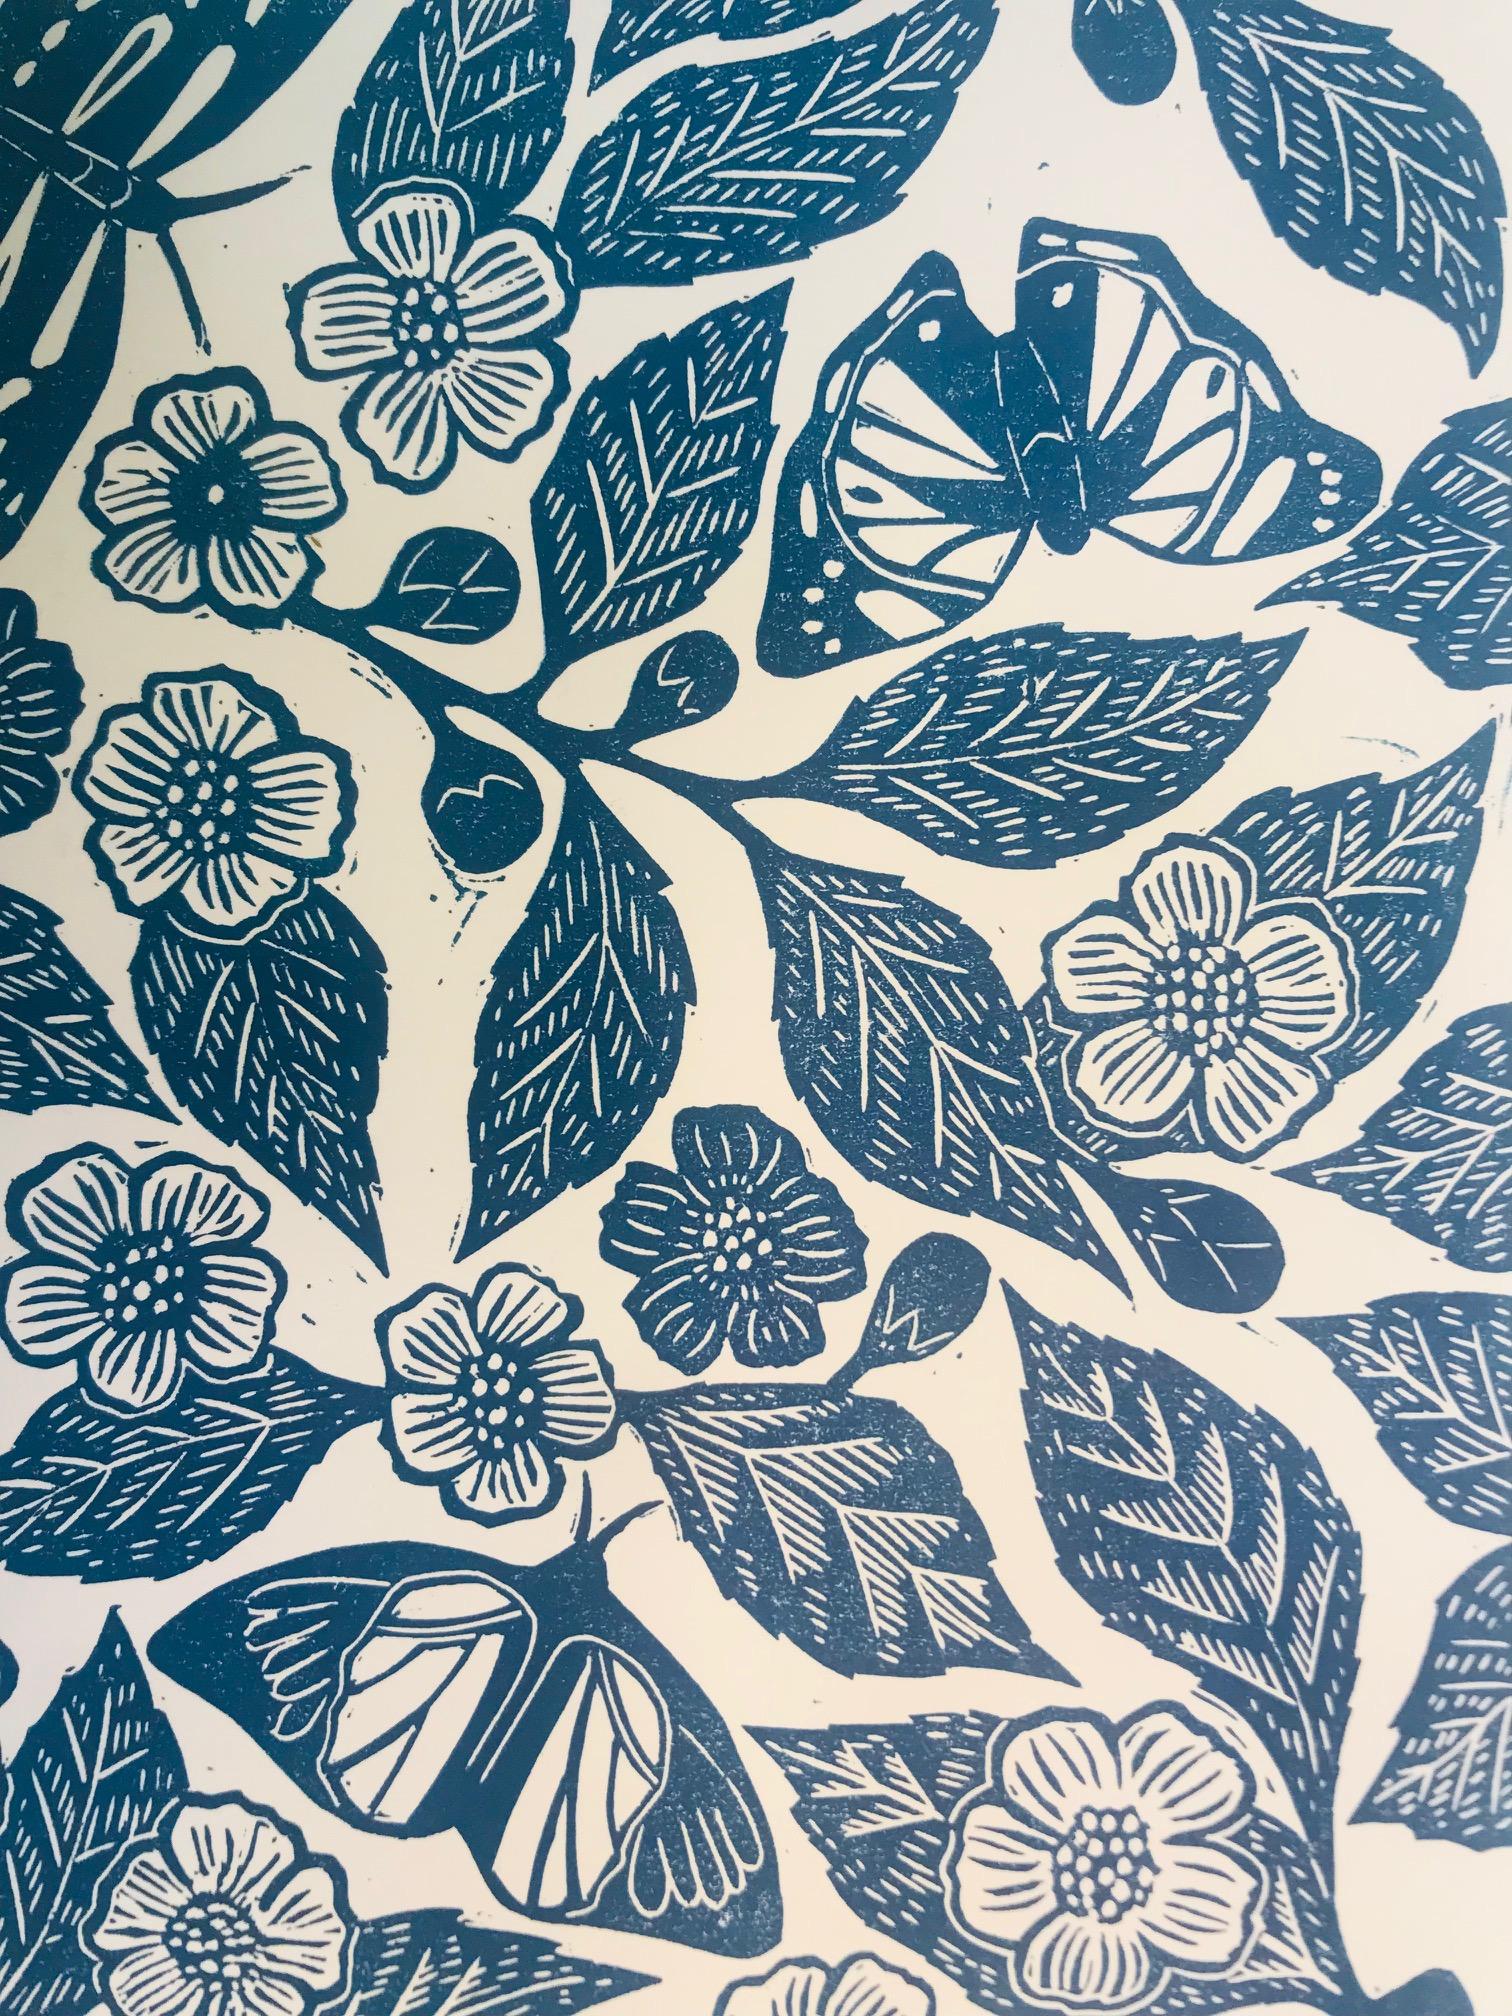 Butterflied and Tea Flowers in Blue Teal - Print by Joanna Padfield